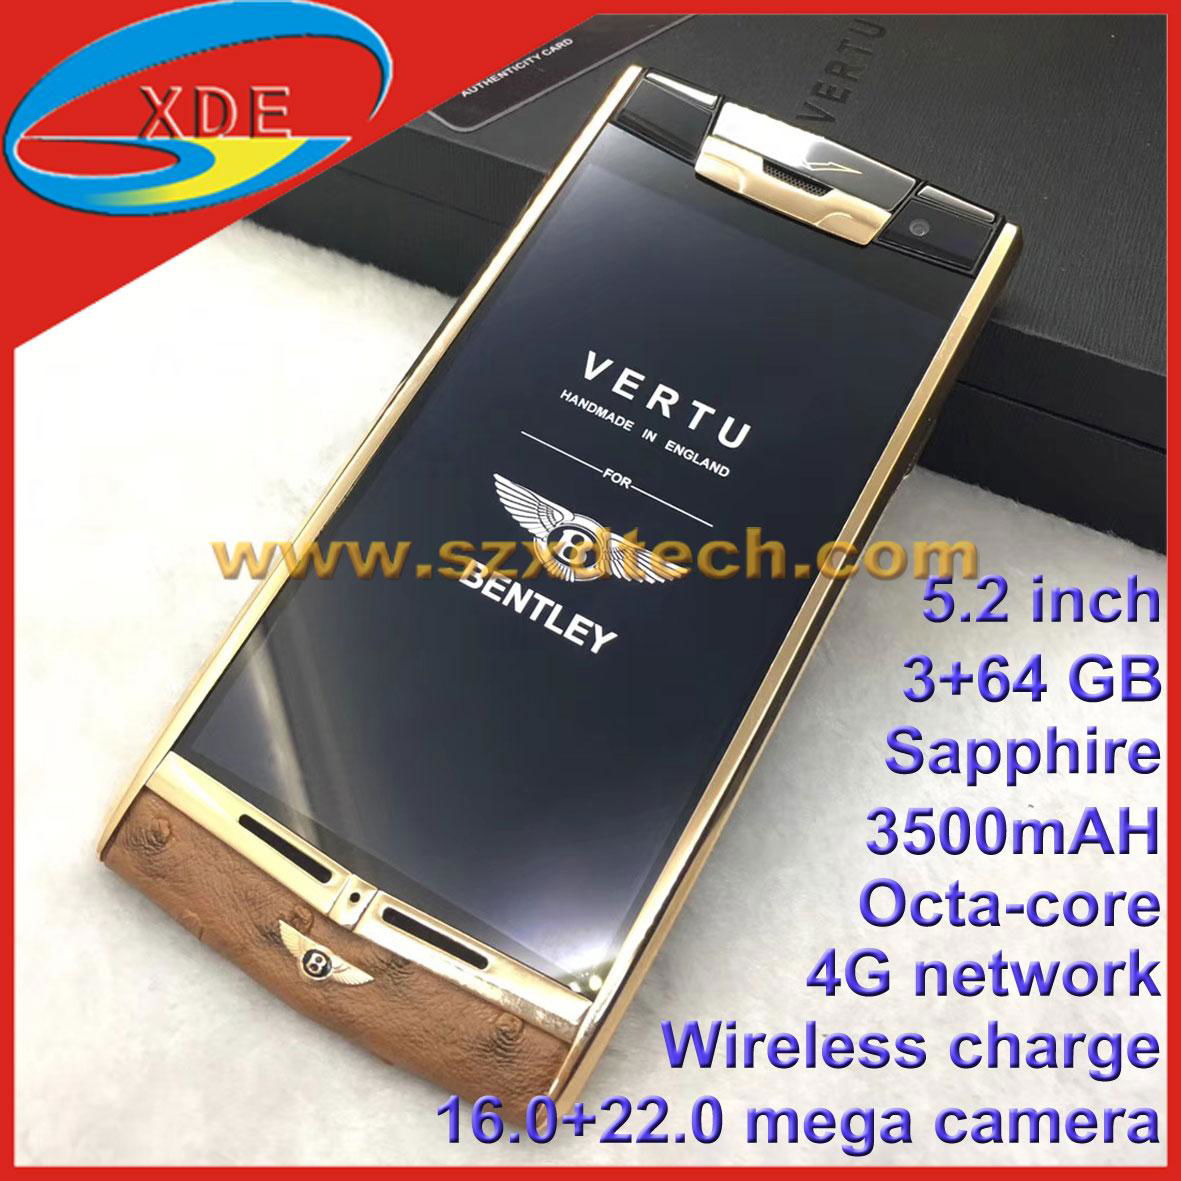 Copy Vertu Signature Touch, Bentley Sexy Ostrich Leather Octacore